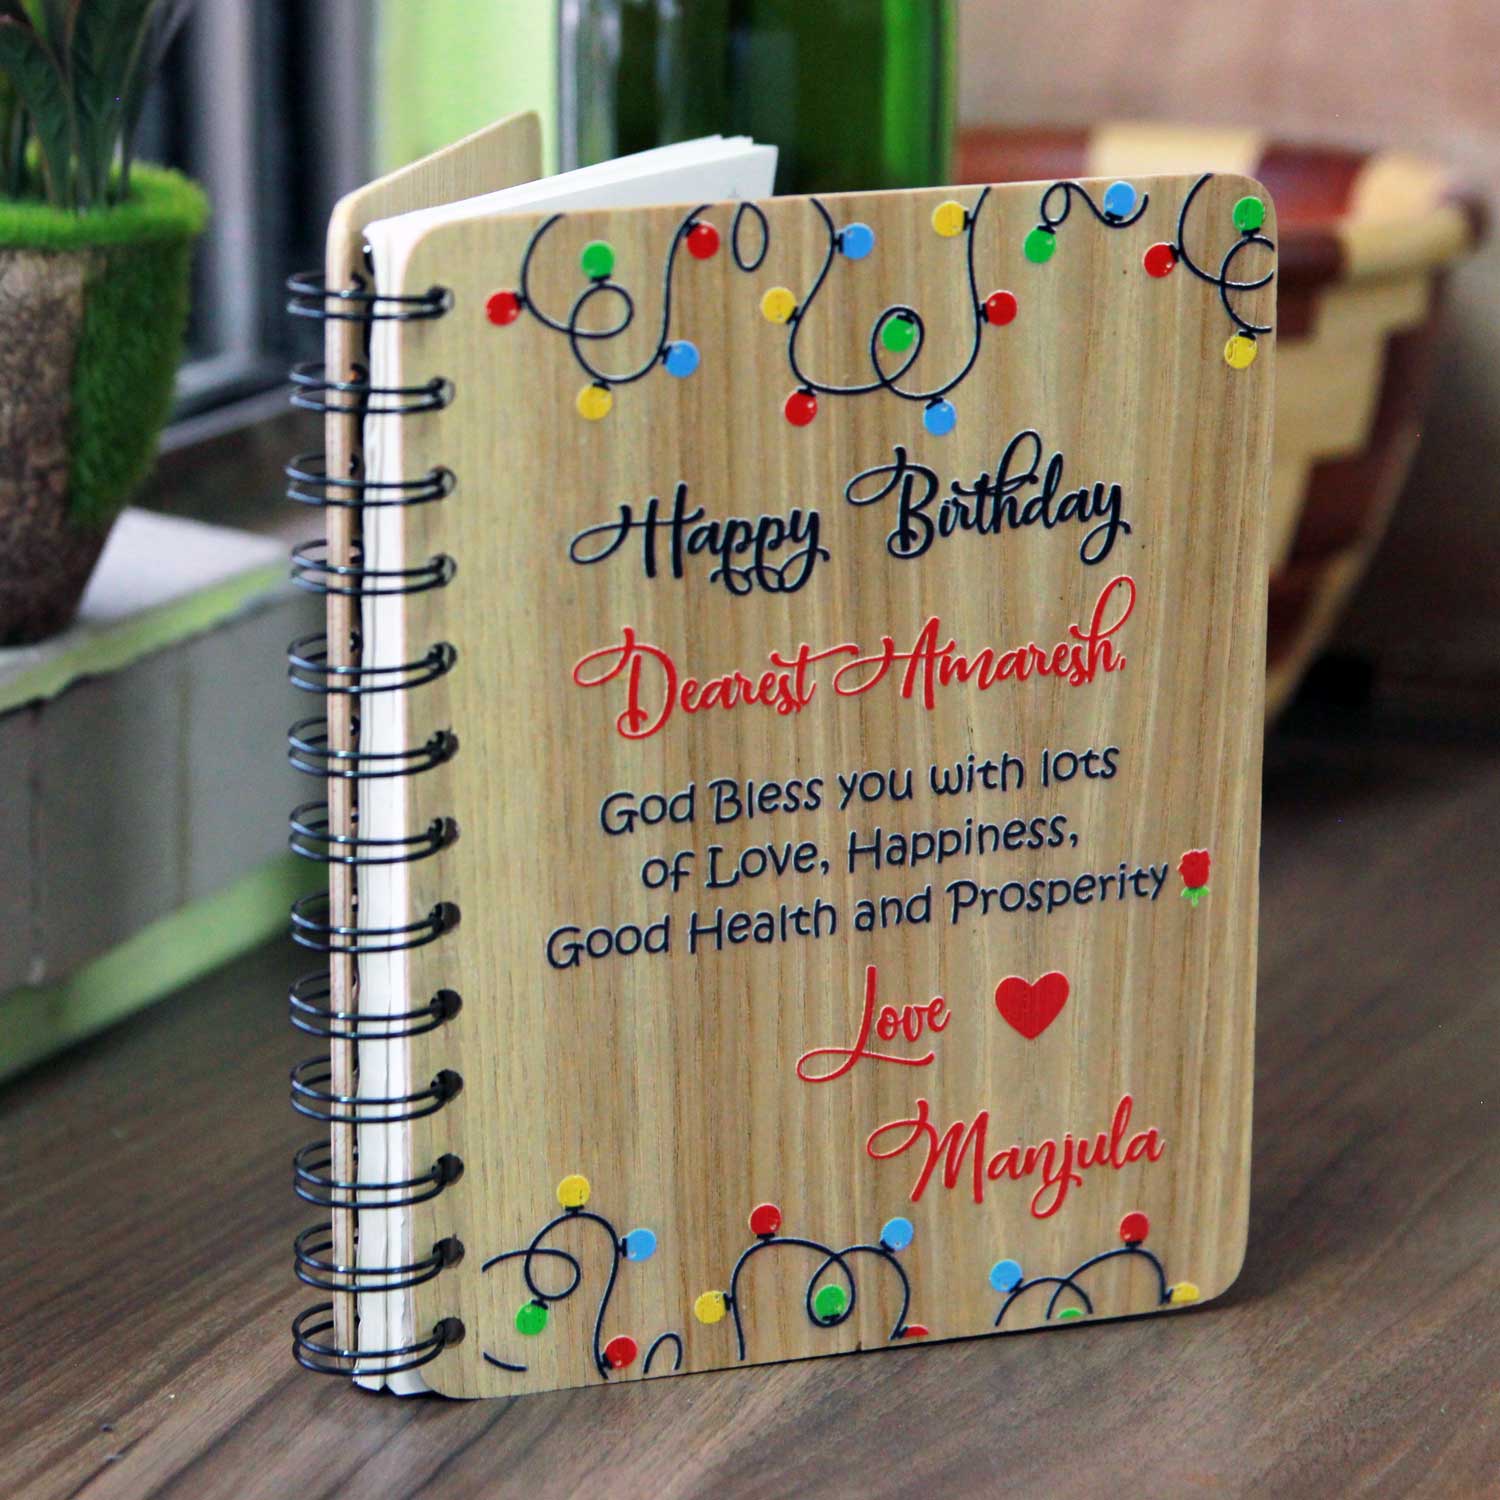 Homemade Birthday Gifts Ideas for Husband